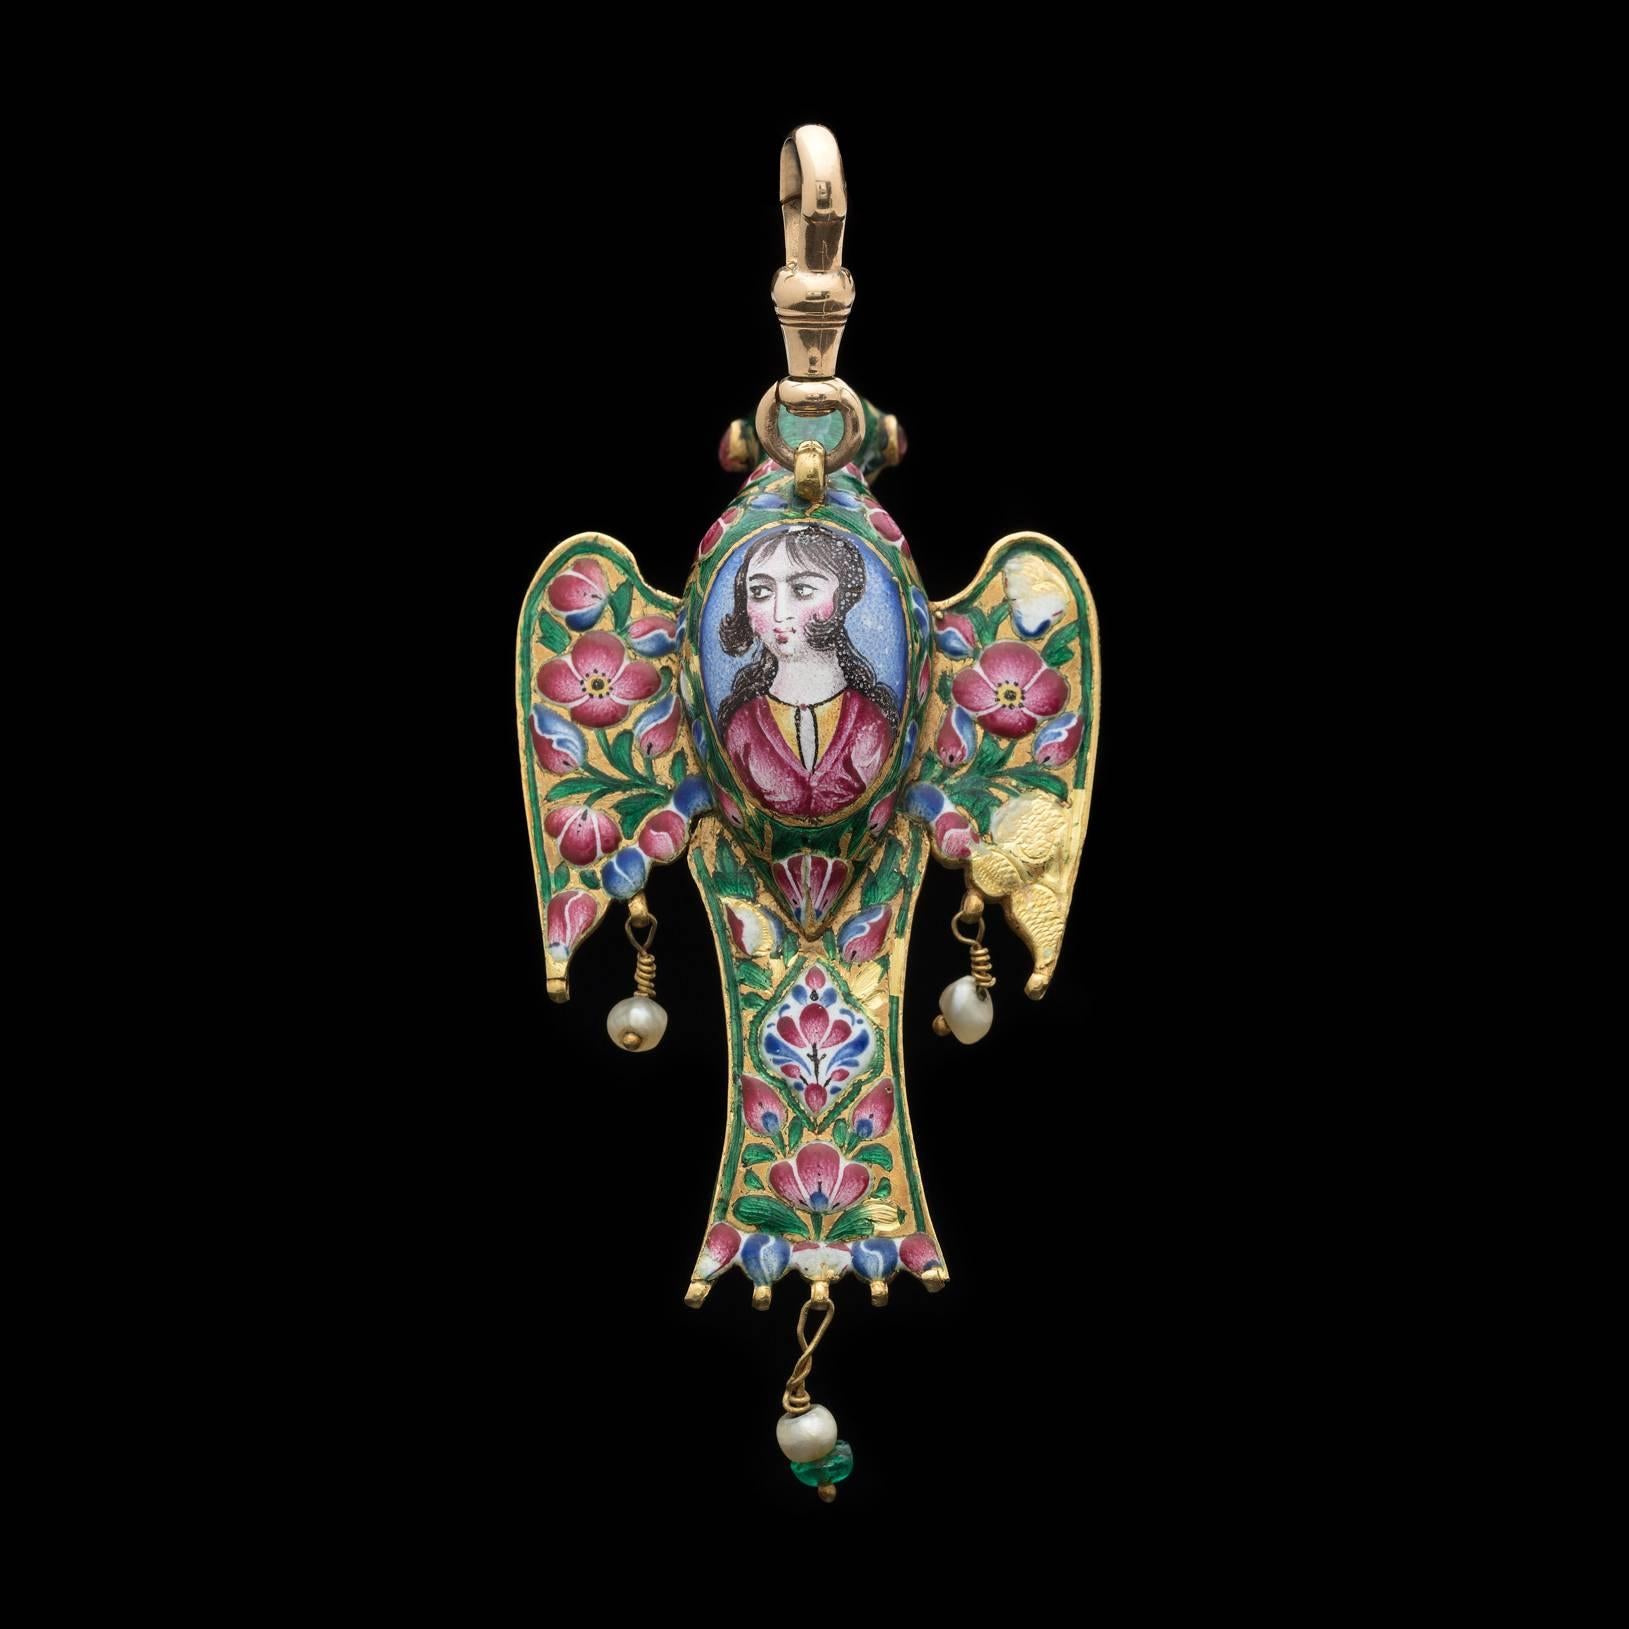 In the shape of a bird, the 22k gold colorfully enameled brooch inset with foil-back hardstones on the front, and a painted enamel portrait on the back, with wings, tail and beak hanging seed pearls, emerald and turquoise. An exceptionally unique